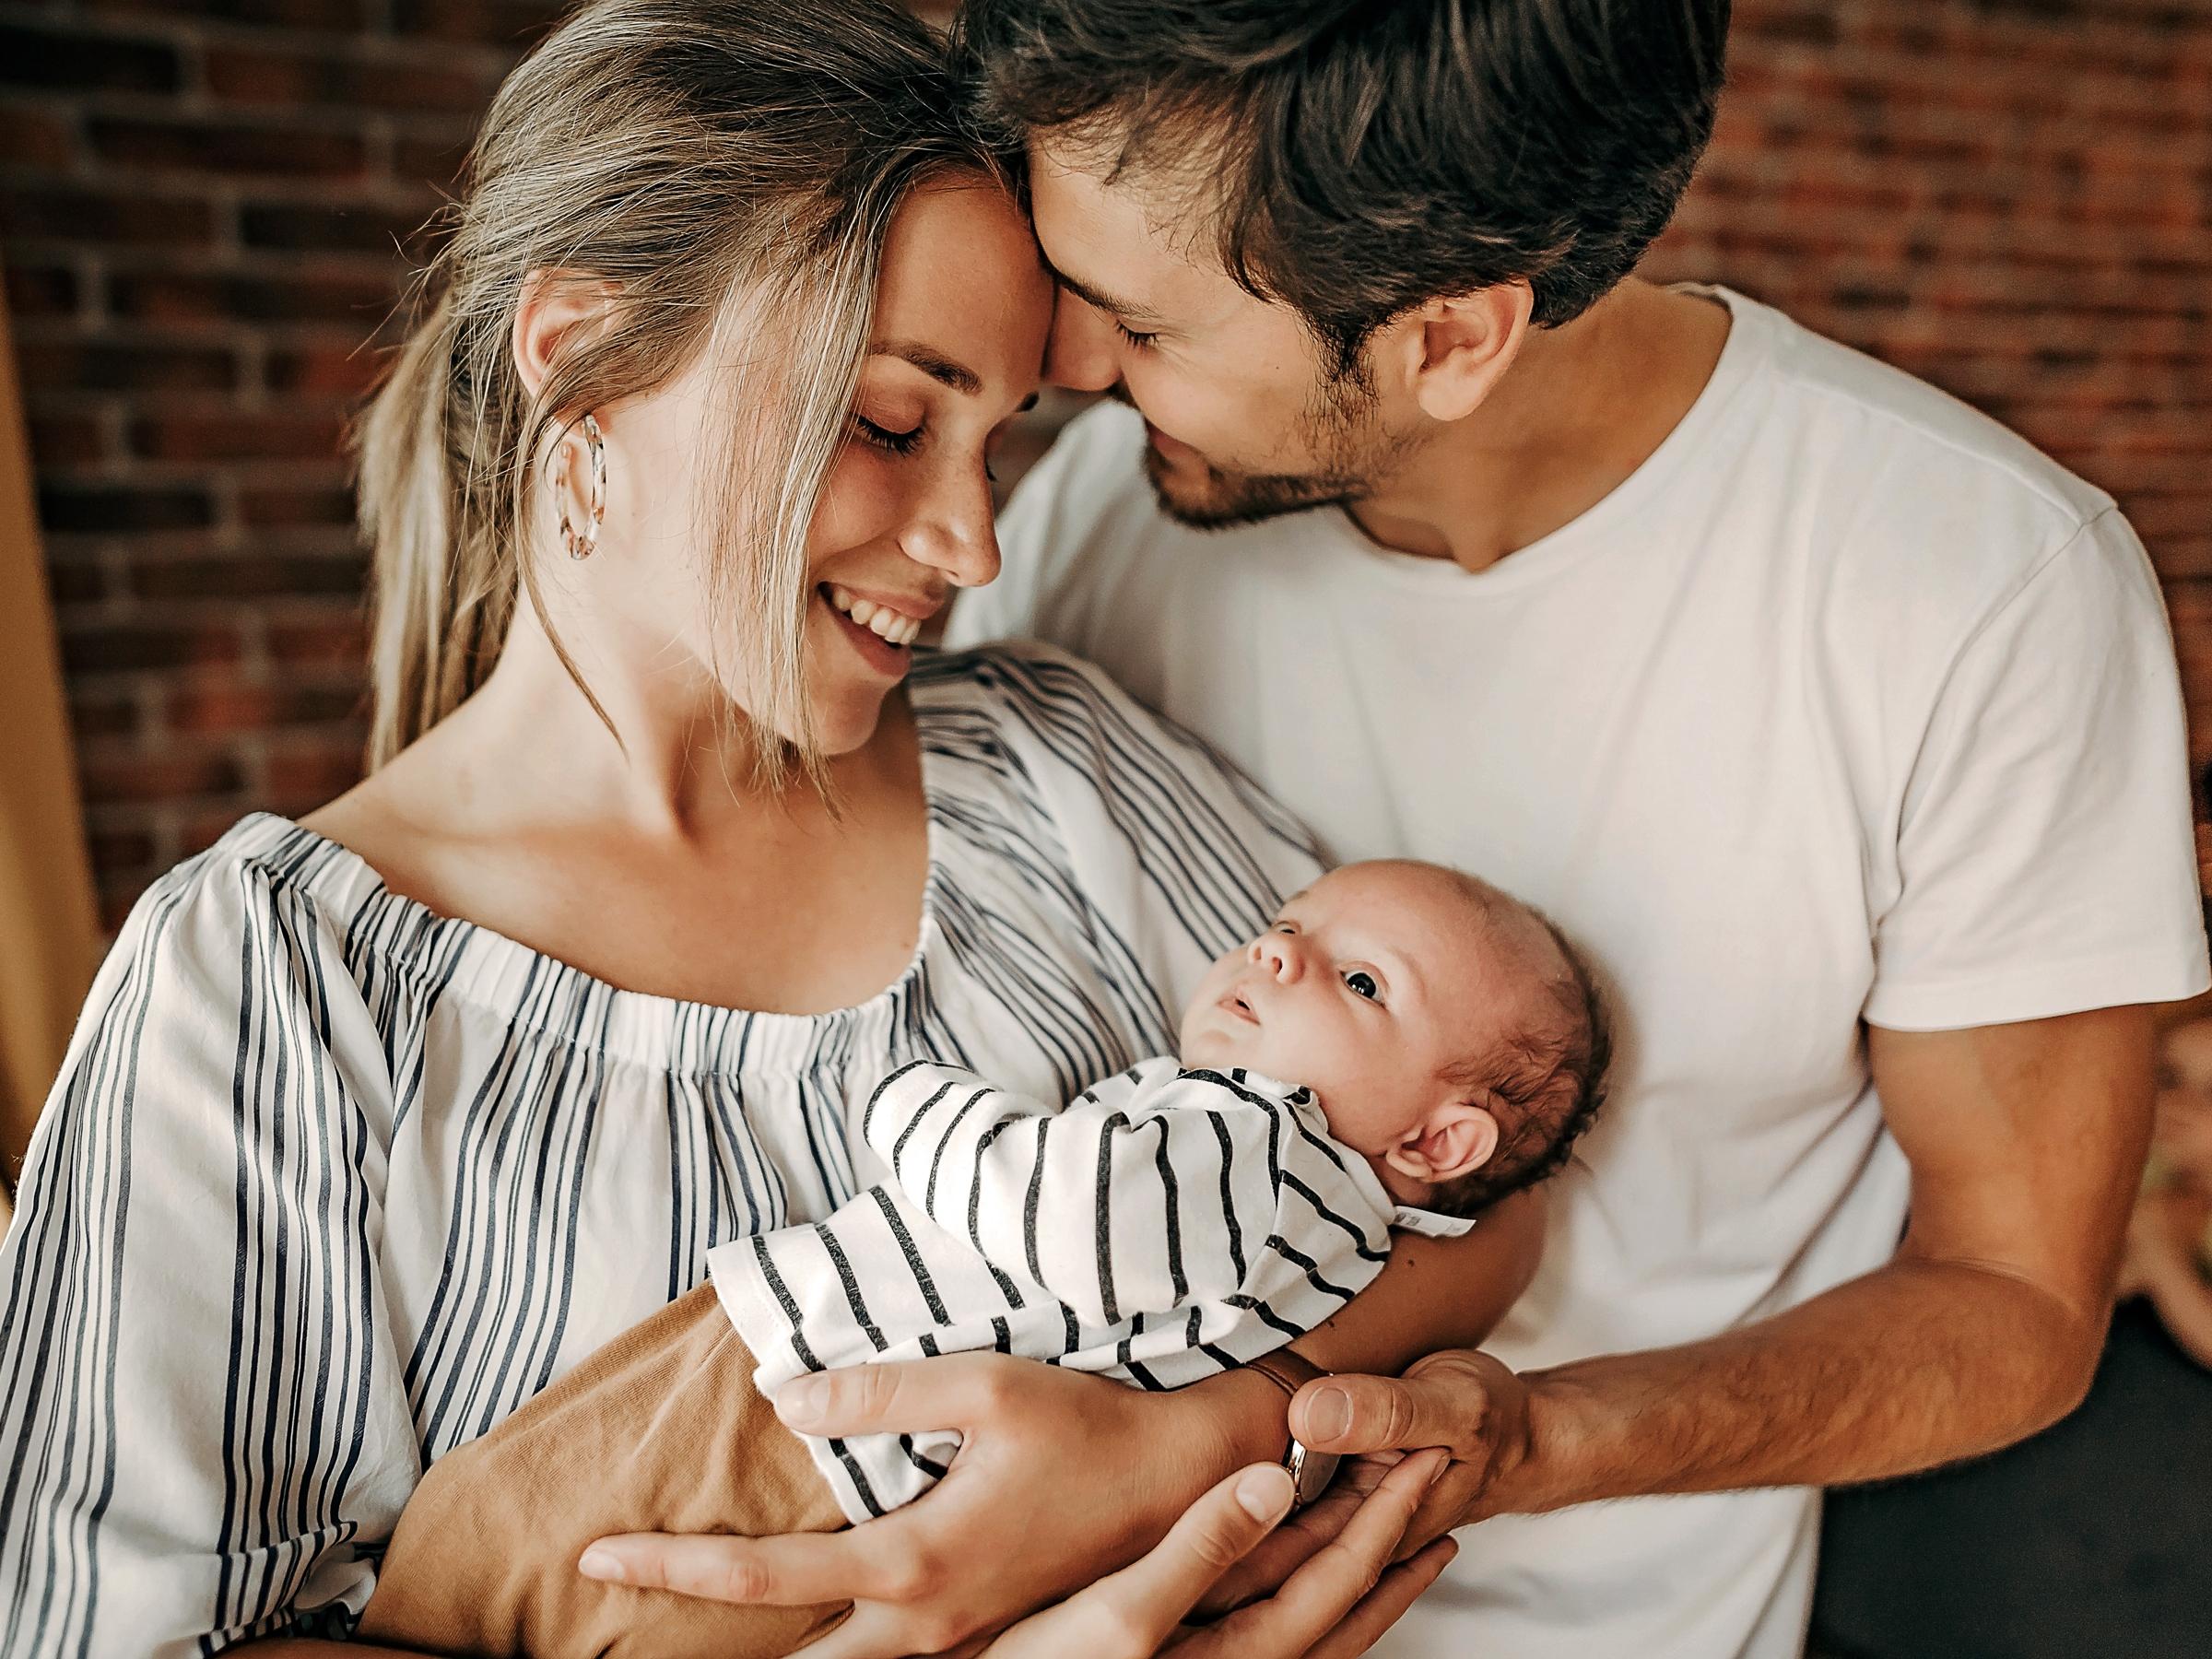 We are parents now - what does this mean for our insurance